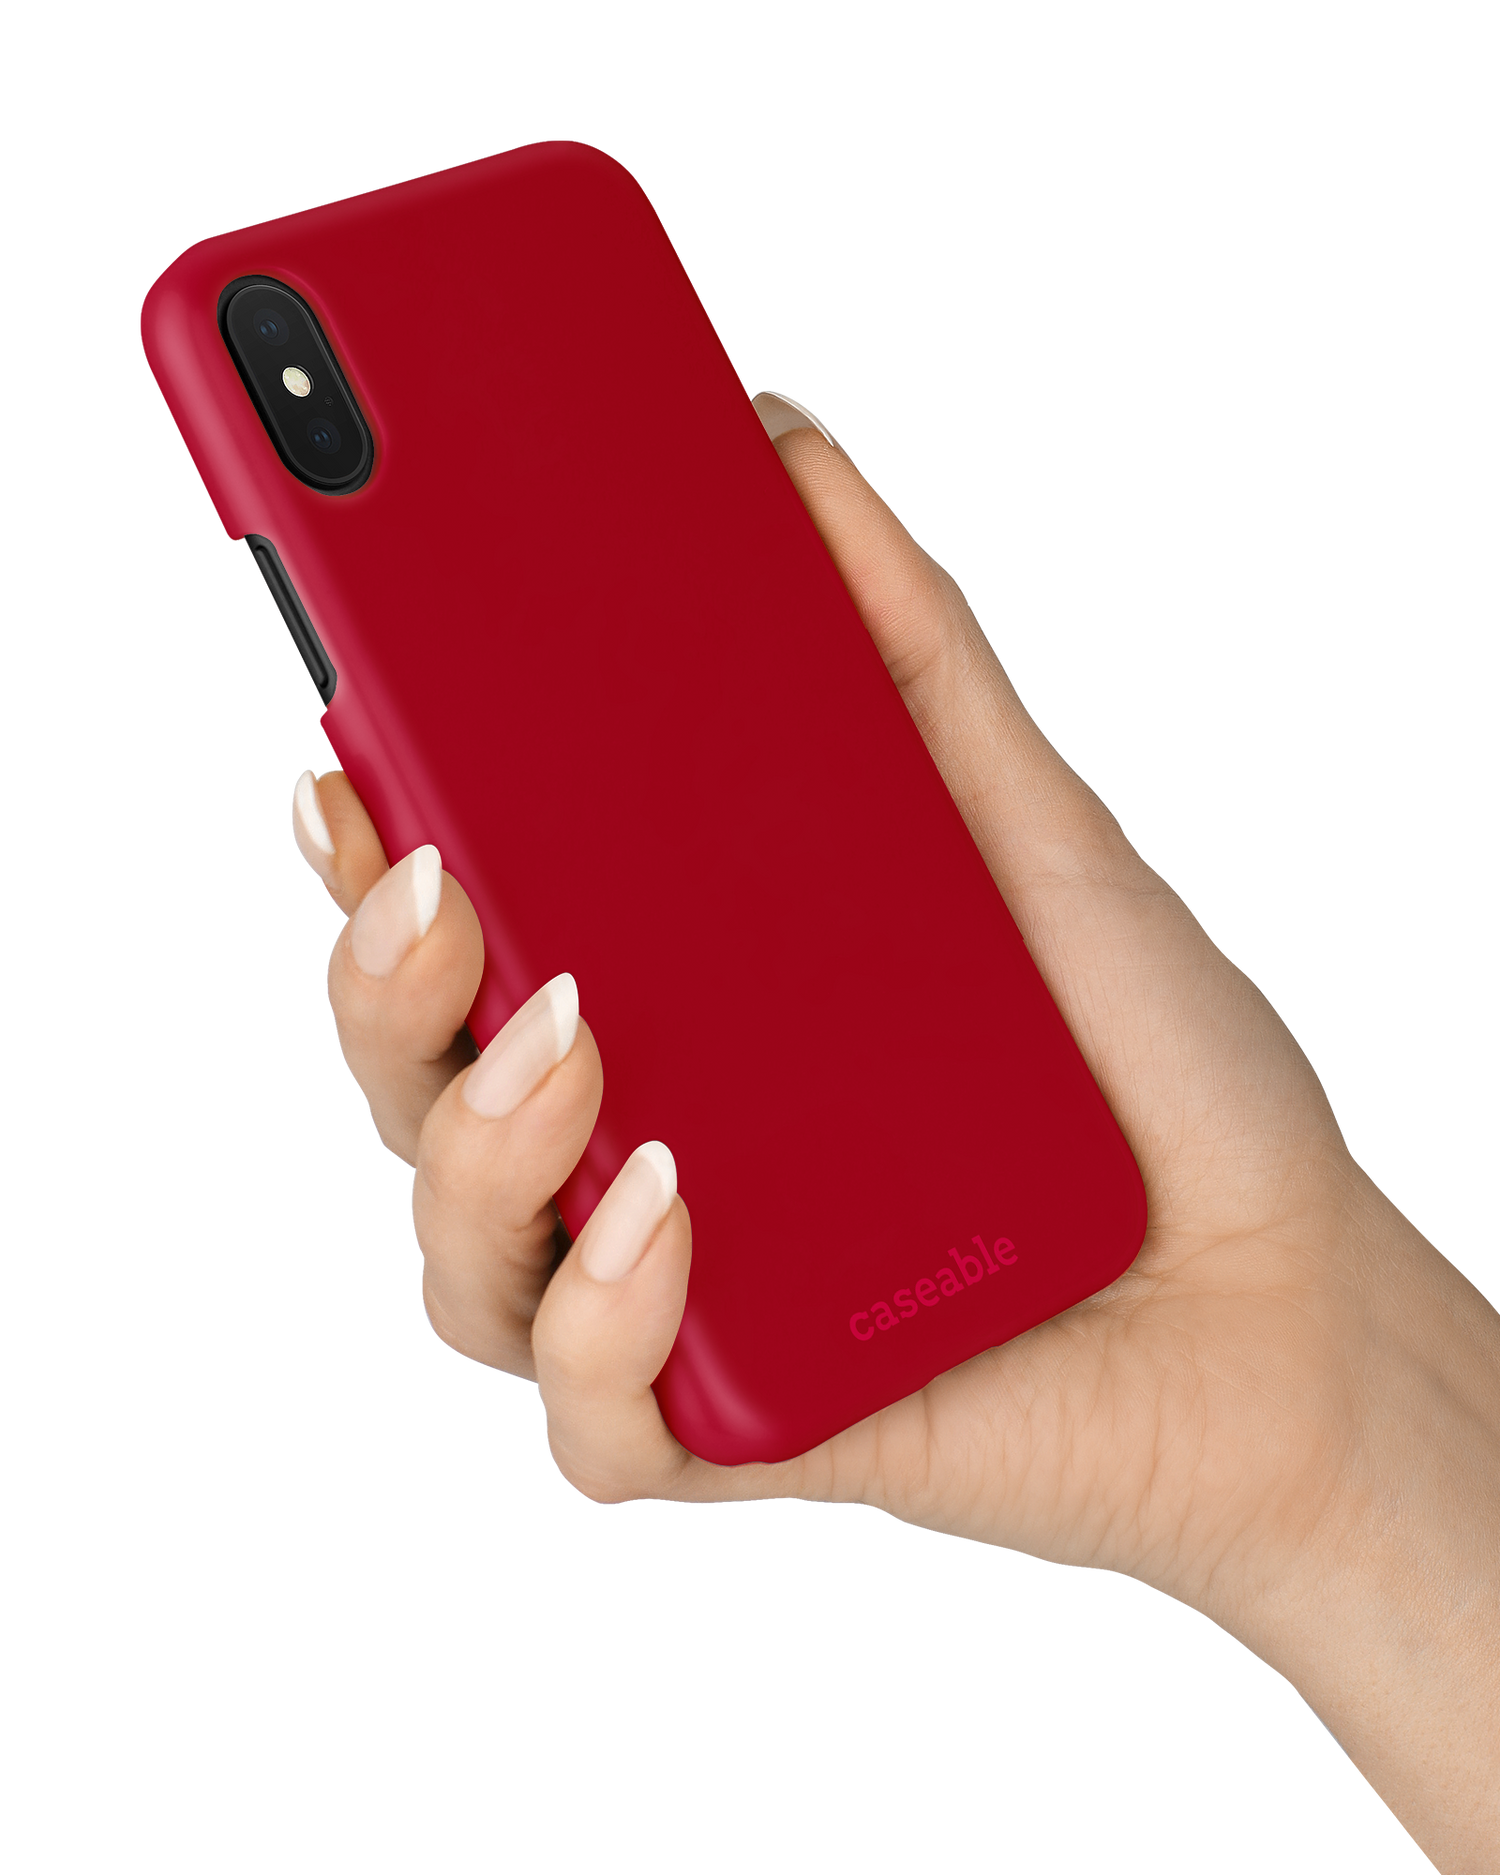 RED Hard Shell Phone Case Apple iPhone X, Apple iPhone XS held in hand